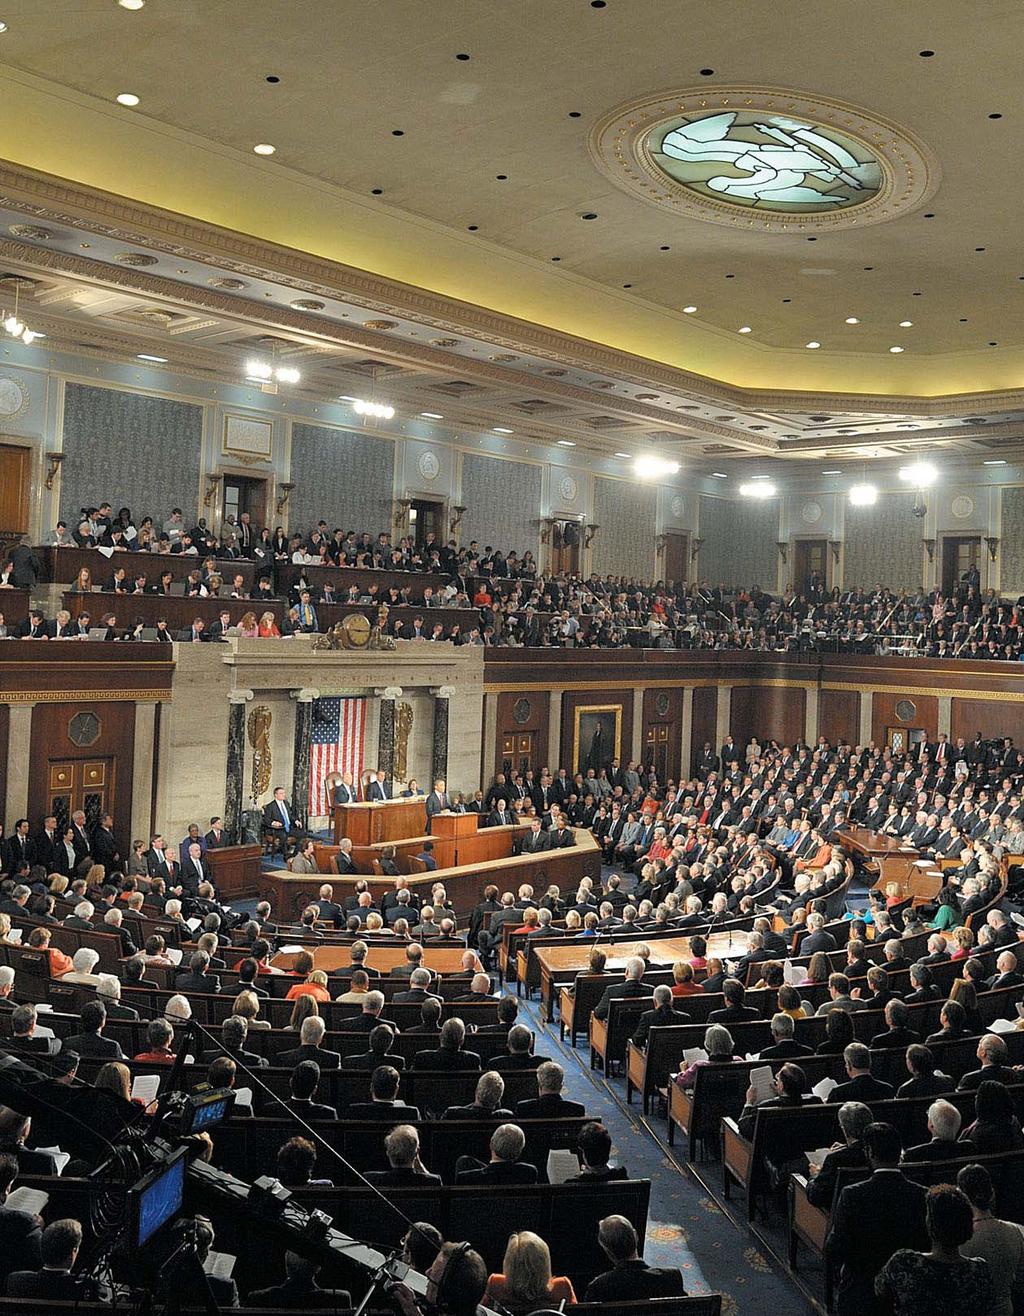 Congress is the center of policymaking in the United States, but the